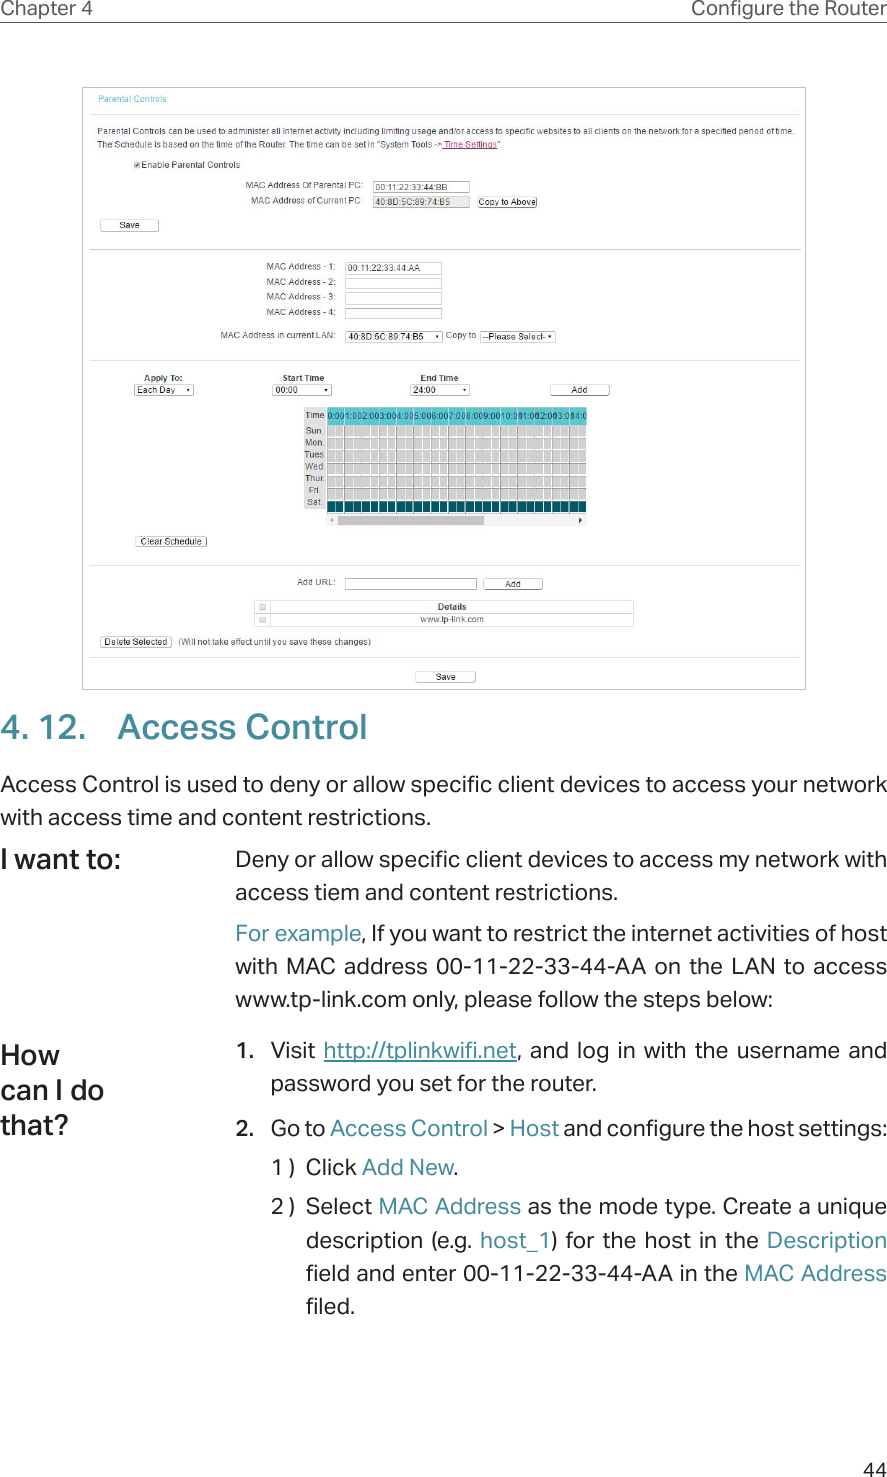 44Chapter 4 &amp;RQƮJXUHWKH5RXWHU4. 12.  Access ControlAccess Control is used to deny or allow specific client devices to access your network with access time and content restrictions.Deny or allow specific client devices to access my network with access tiem and content restrictions.For example, If you want to restrict the internet activities of host with MAC address 00-11-22-33-44-AA on the LAN to access www.tp-link.com only, please follow the steps below:1.  Visit  http://tplinkwifi.net, and log in with the username and password you set for the router.2.  Go to Access Control &gt; Host and configure the host settings:1 )  Click Add New.2 )  Select MAC Address as the mode type. Create a unique description (e.g. host_1) for the host in the Description field and enter 00-11-22-33-44-AA in the MAC Address filed.I want to:How can I do that?